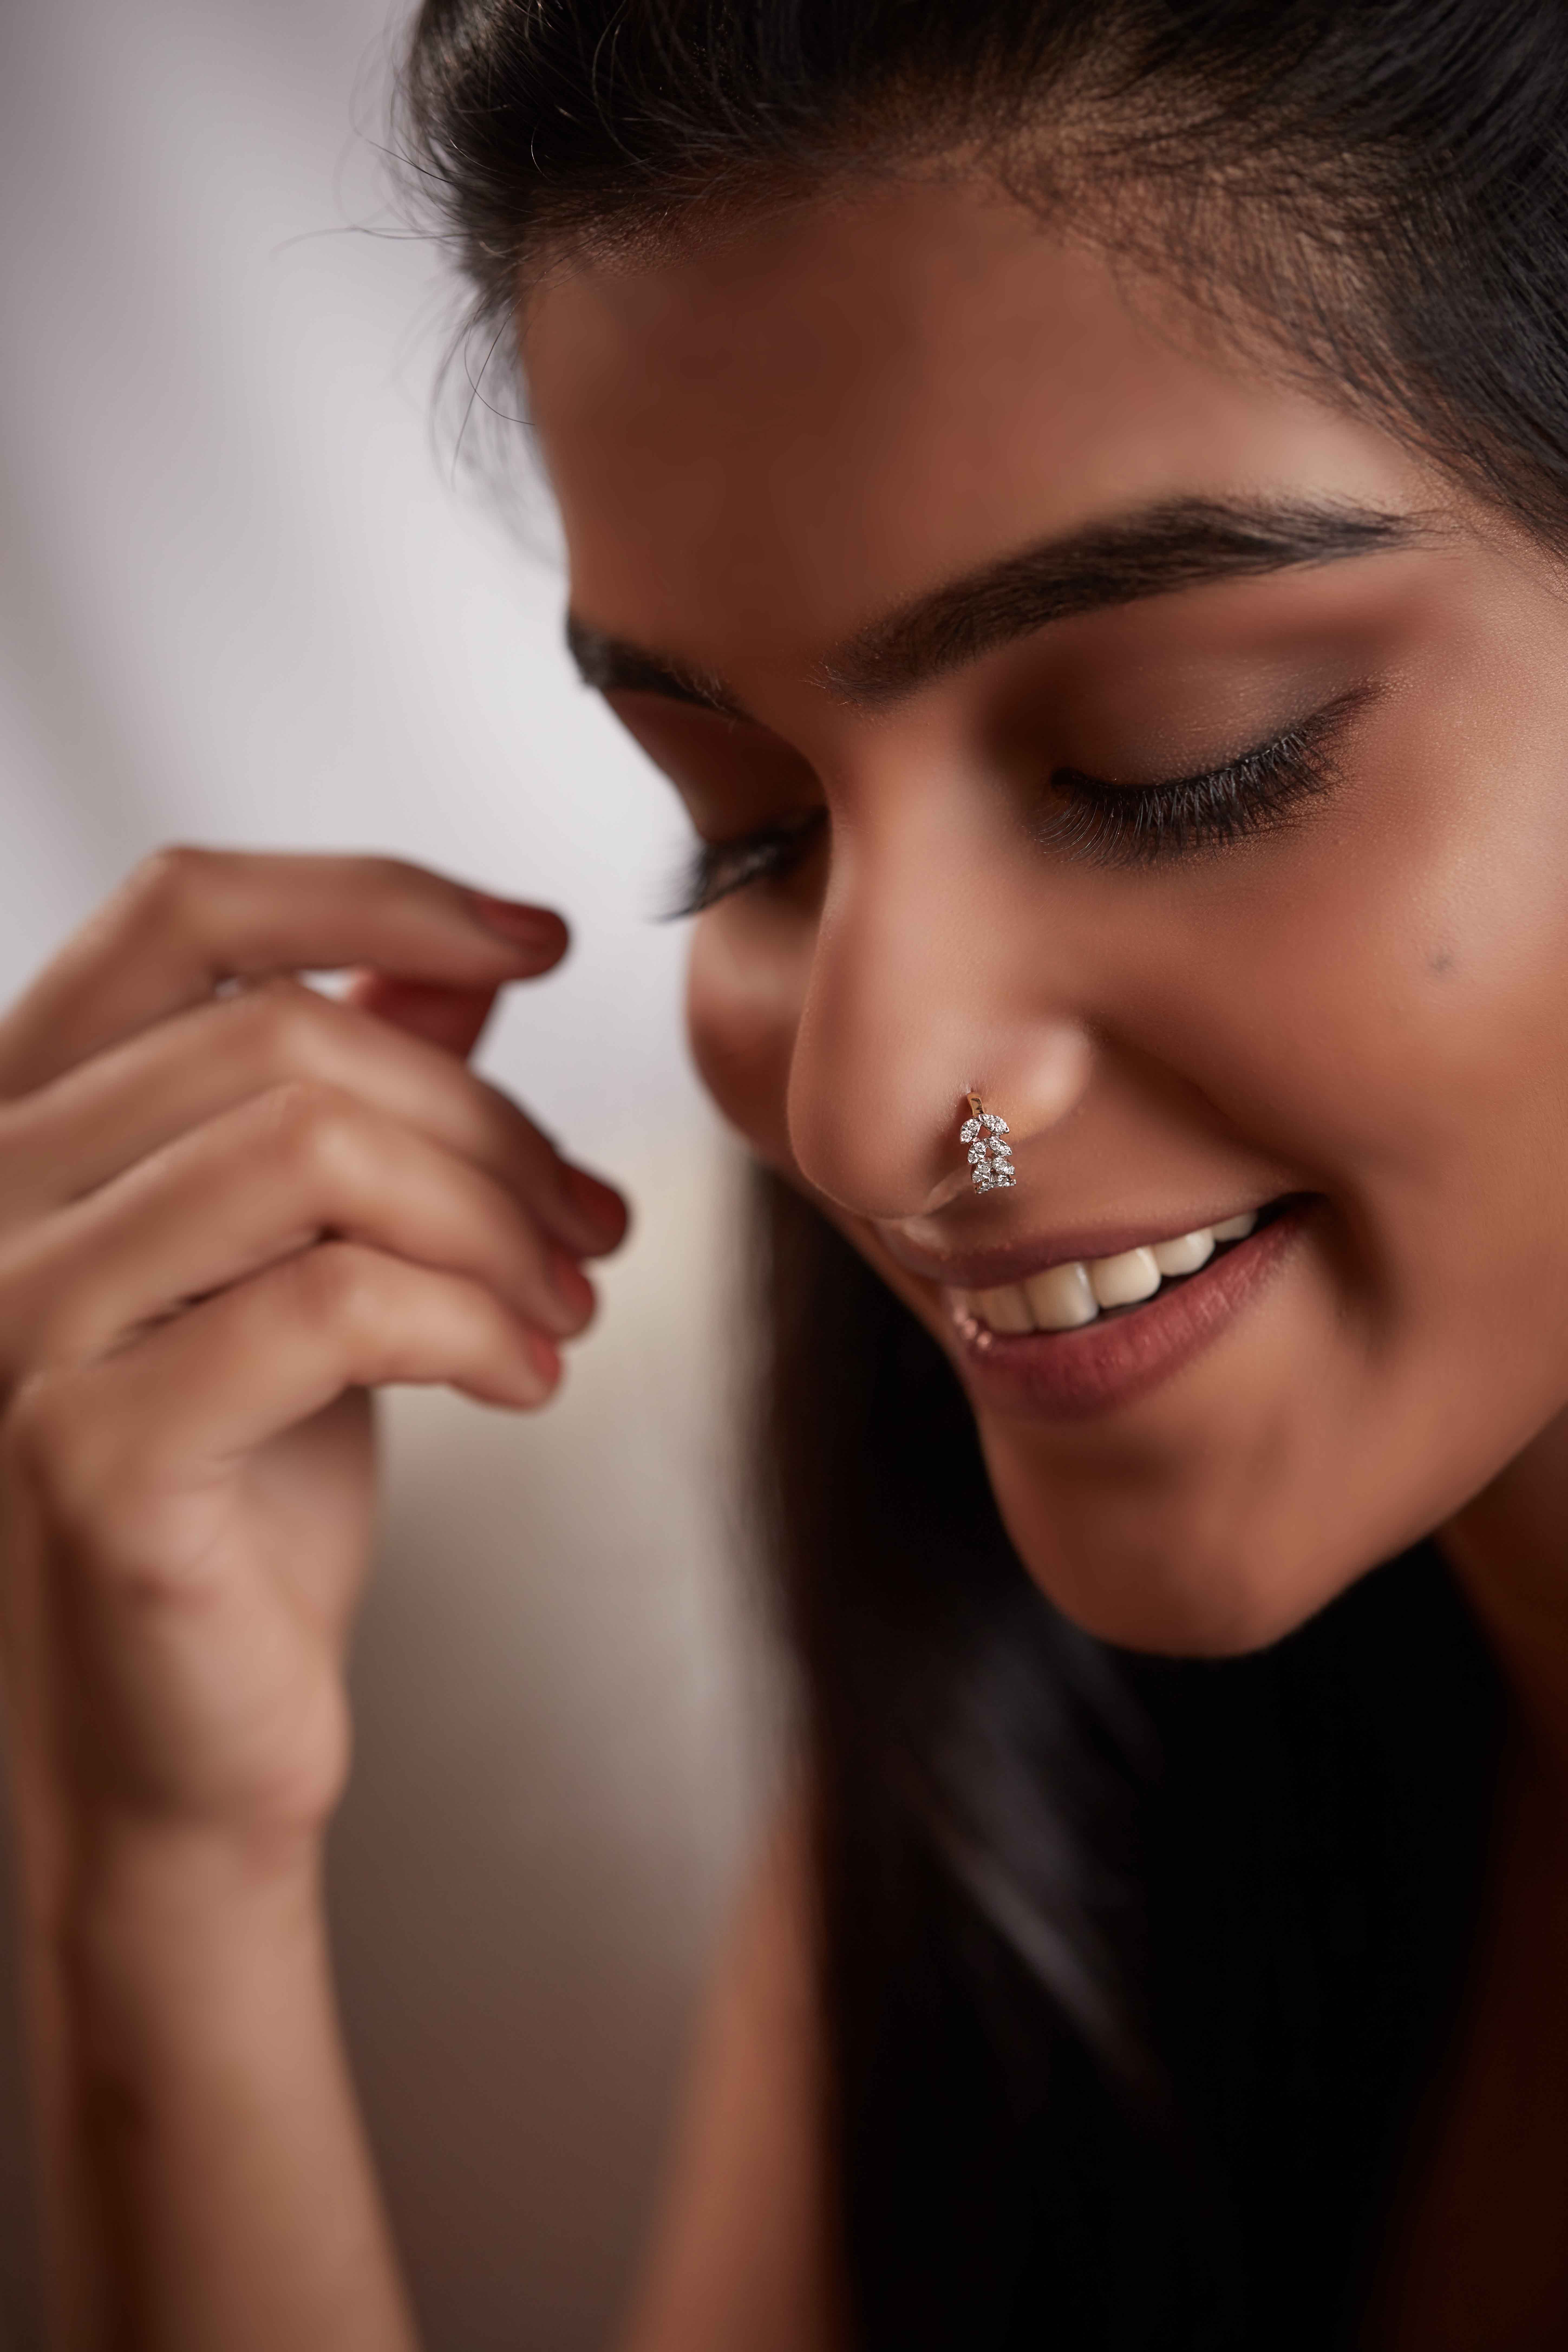 Buy Gold Nose Ring Designs Snake Nose Rings Designs Gold Nose Ring Gold  Design of Nose Ring in Gold Nose Rings Designs Gold Nose Stud Designs  Online in India - Etsy